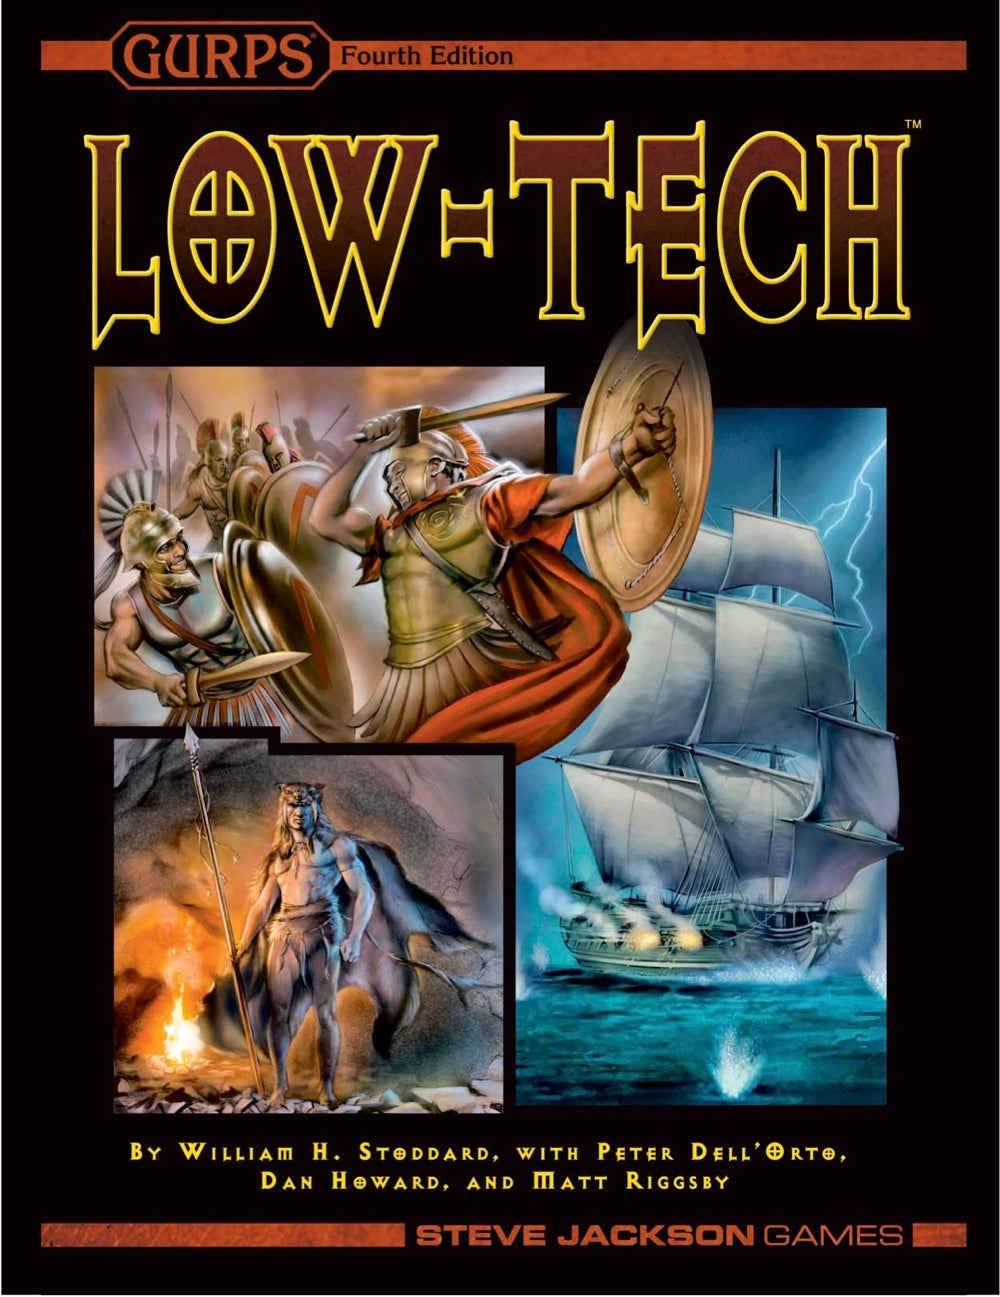 GURPS Fourth Edition: Low-Tech